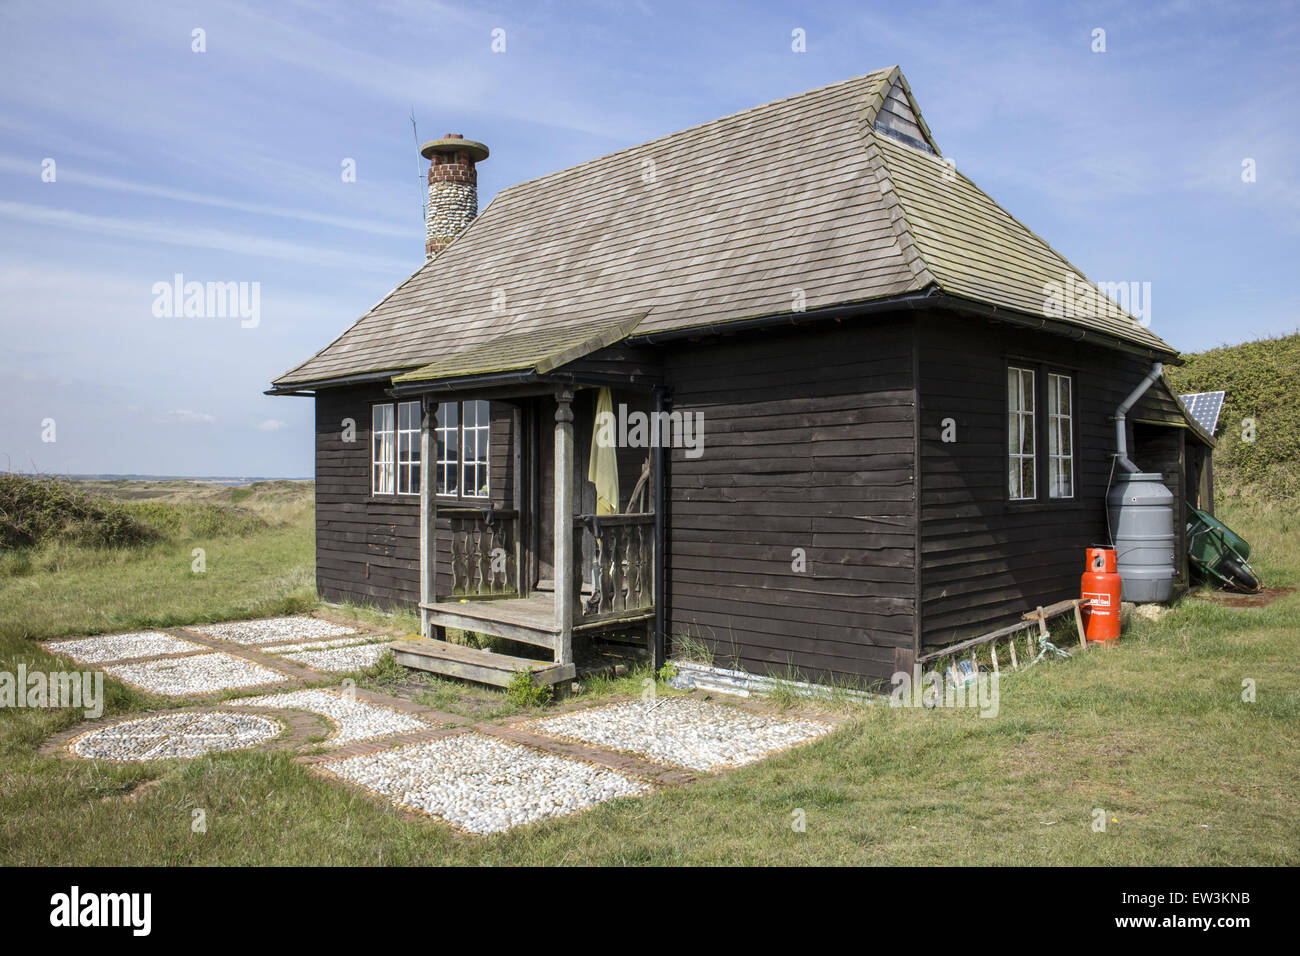 The Wardens cottage on Scolt Head Island Nature Reserve, the roof is made of cedar wood tiles. North Norfolk. The Warden's Cottage was first used by Emma Turner in 1923. Stock Photo